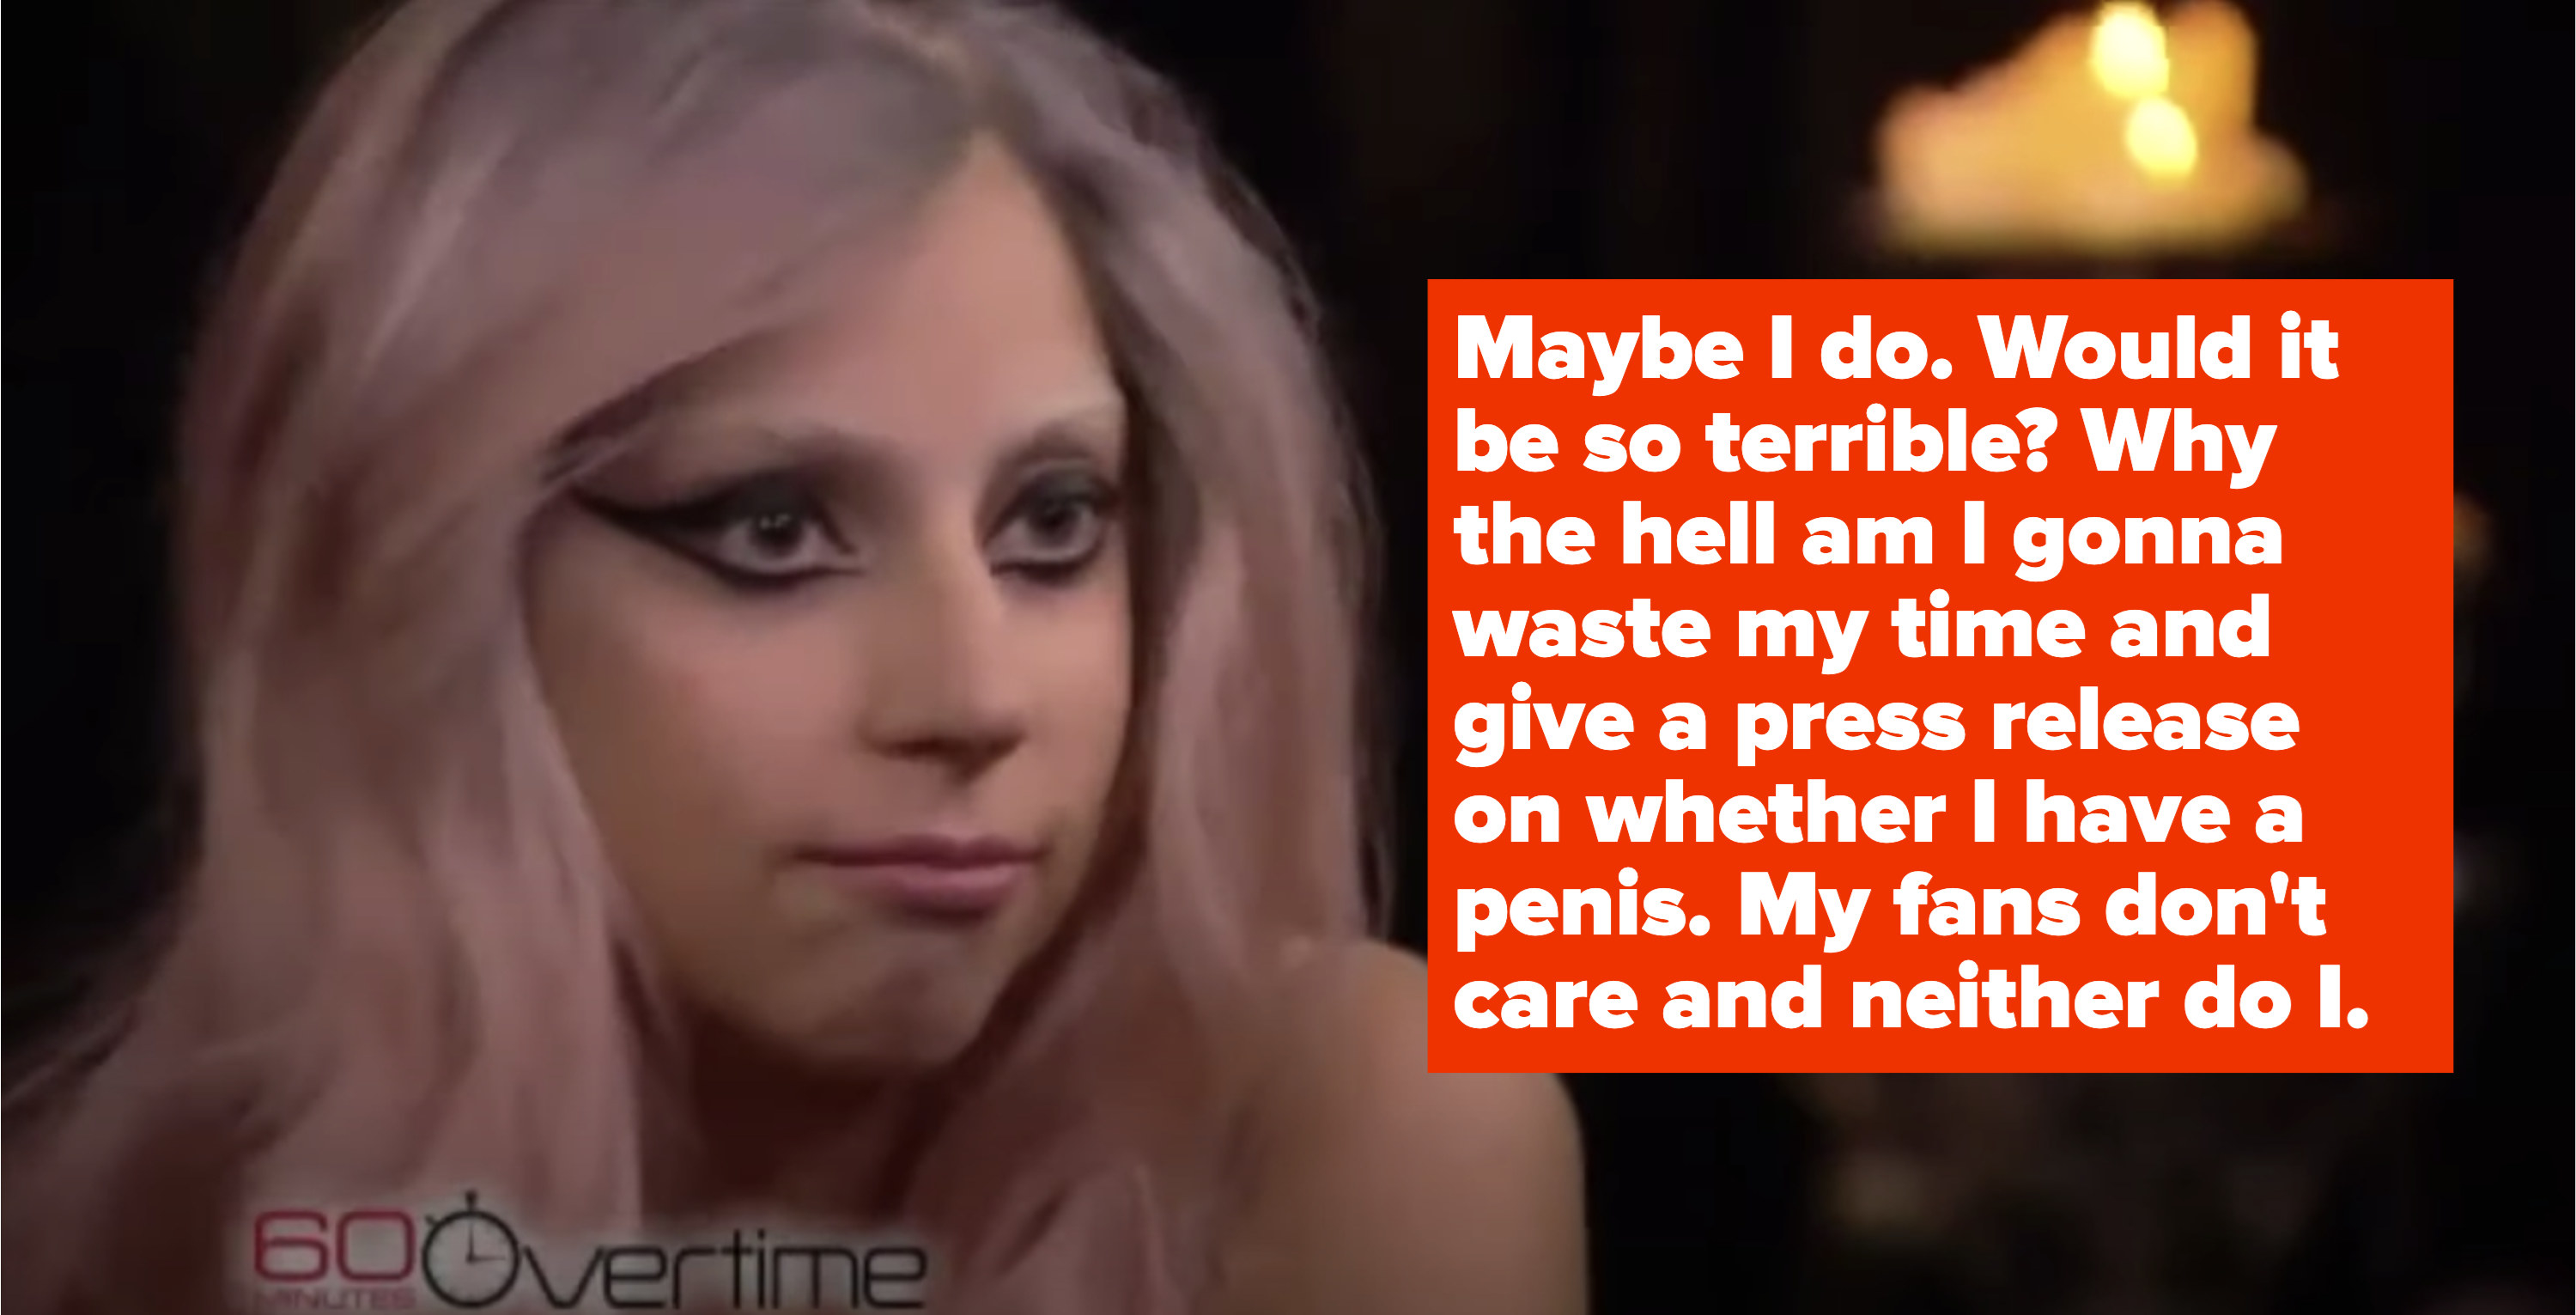 lady gaga saying who cares if she has a penis or not